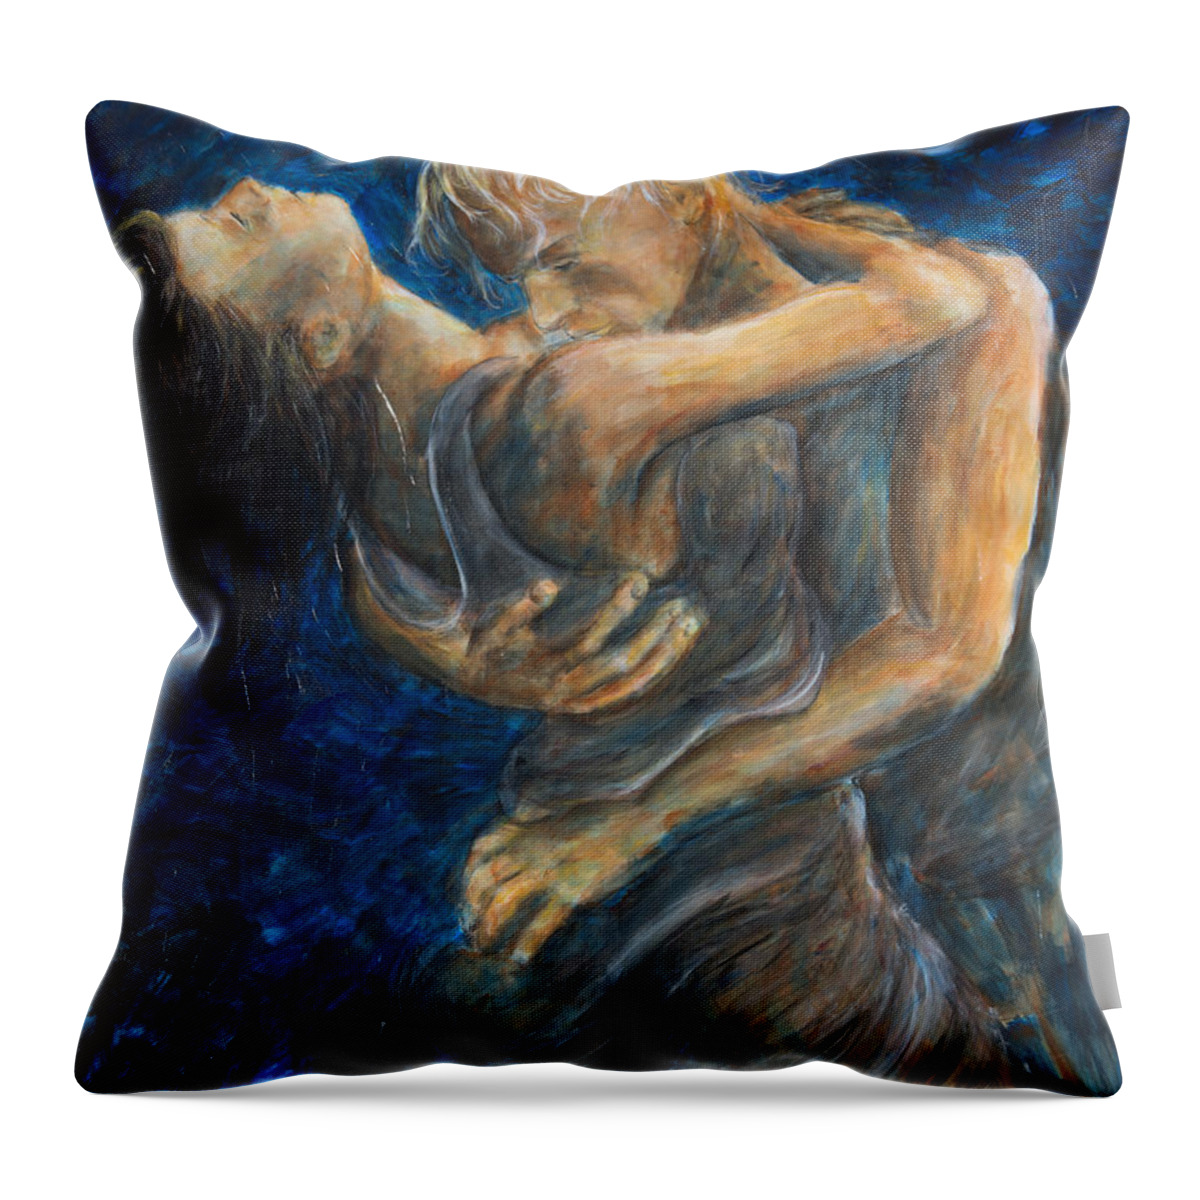 Slow Dancing Throw Pillow featuring the painting Slow Dancing III by Nik Helbig